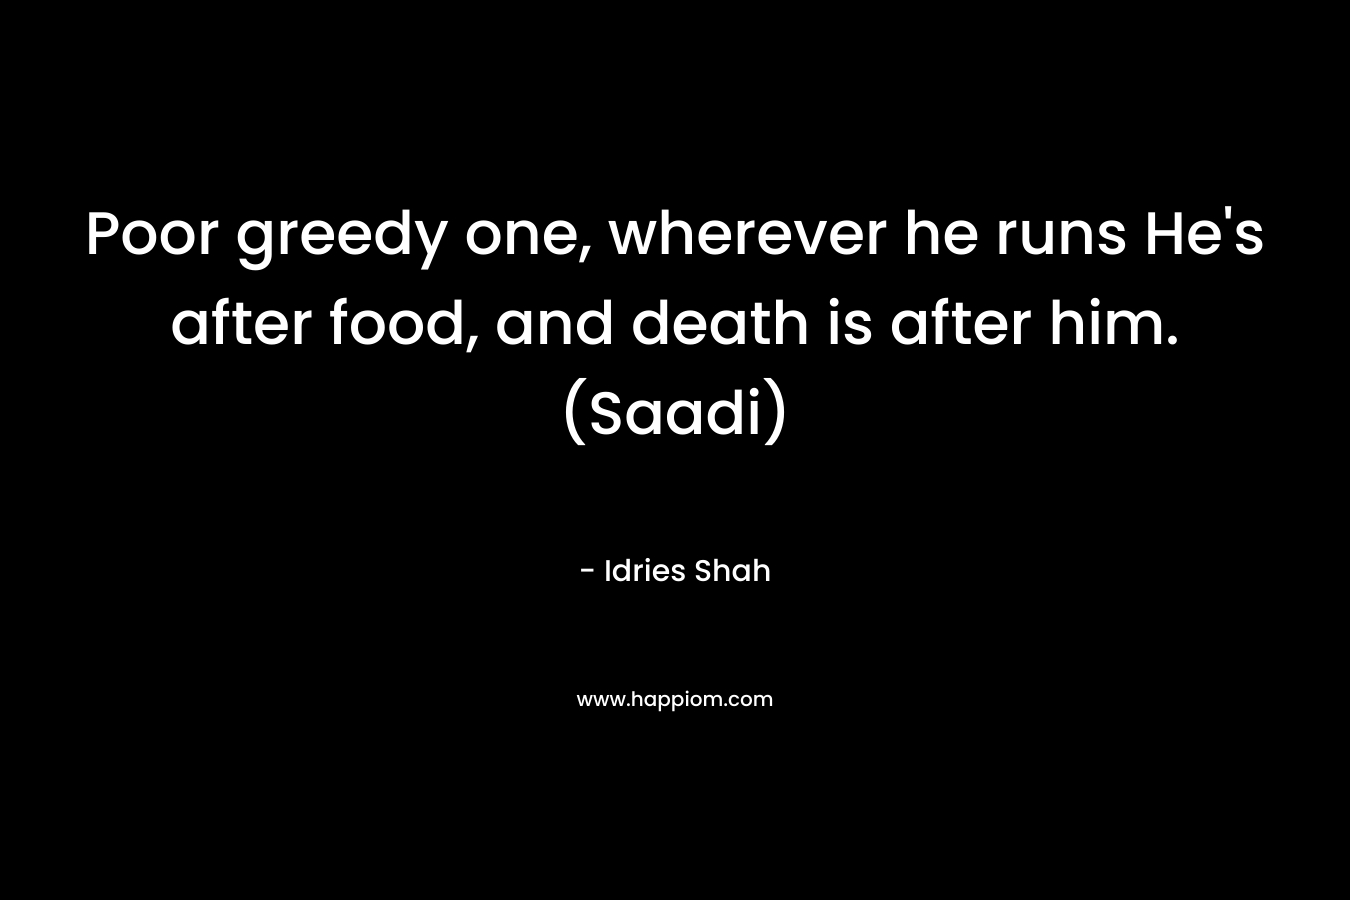 Poor greedy one, wherever he runs He's after food, and death is after him.(Saadi)